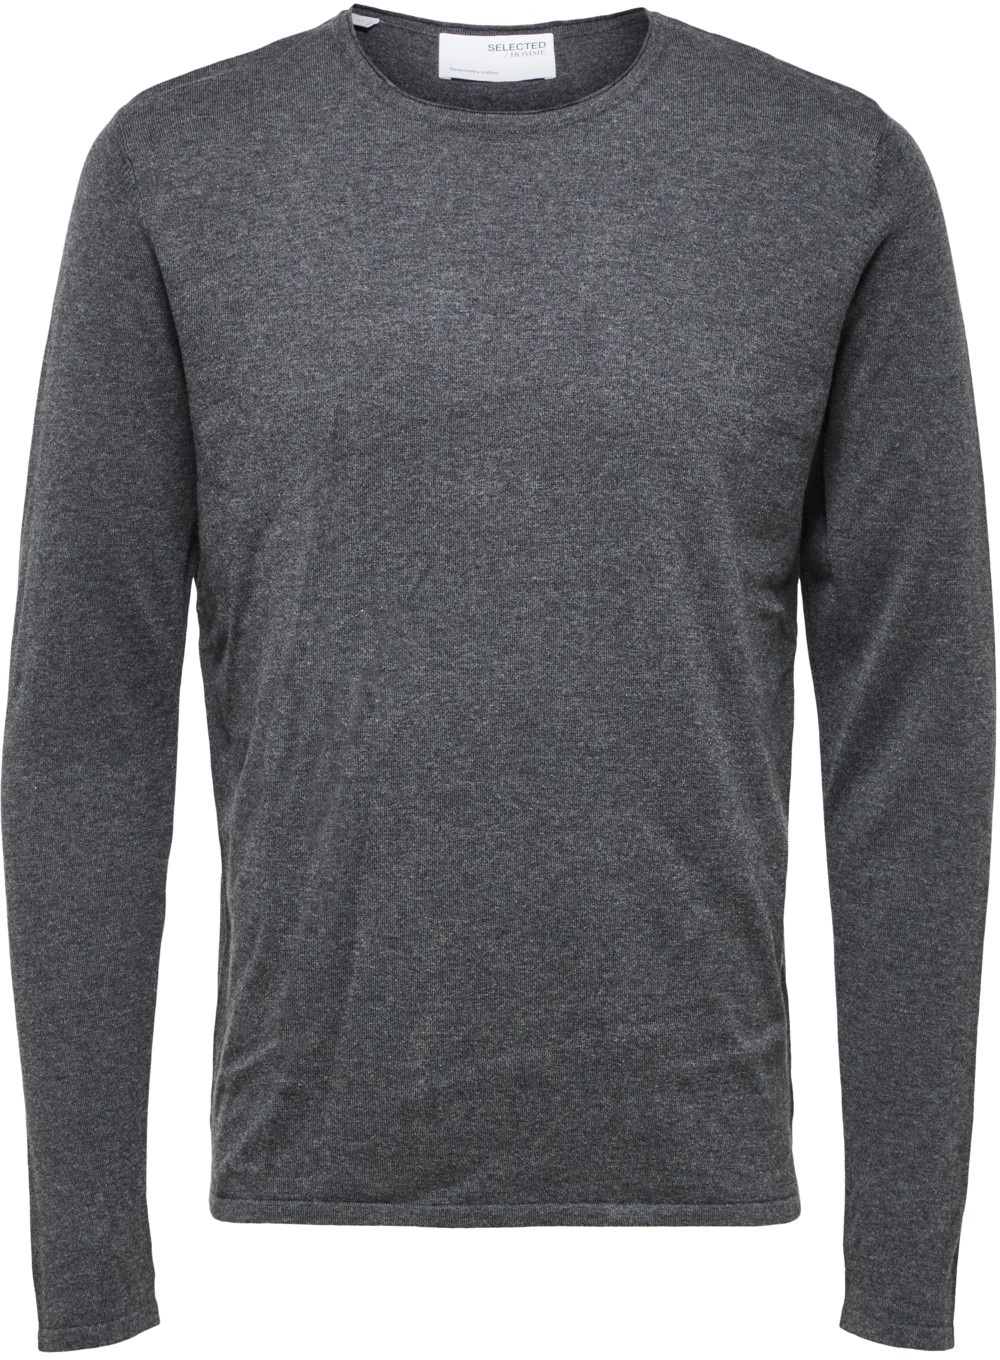 Selected Herren Rundhals Pullover SLHROME Grau 16079774 M